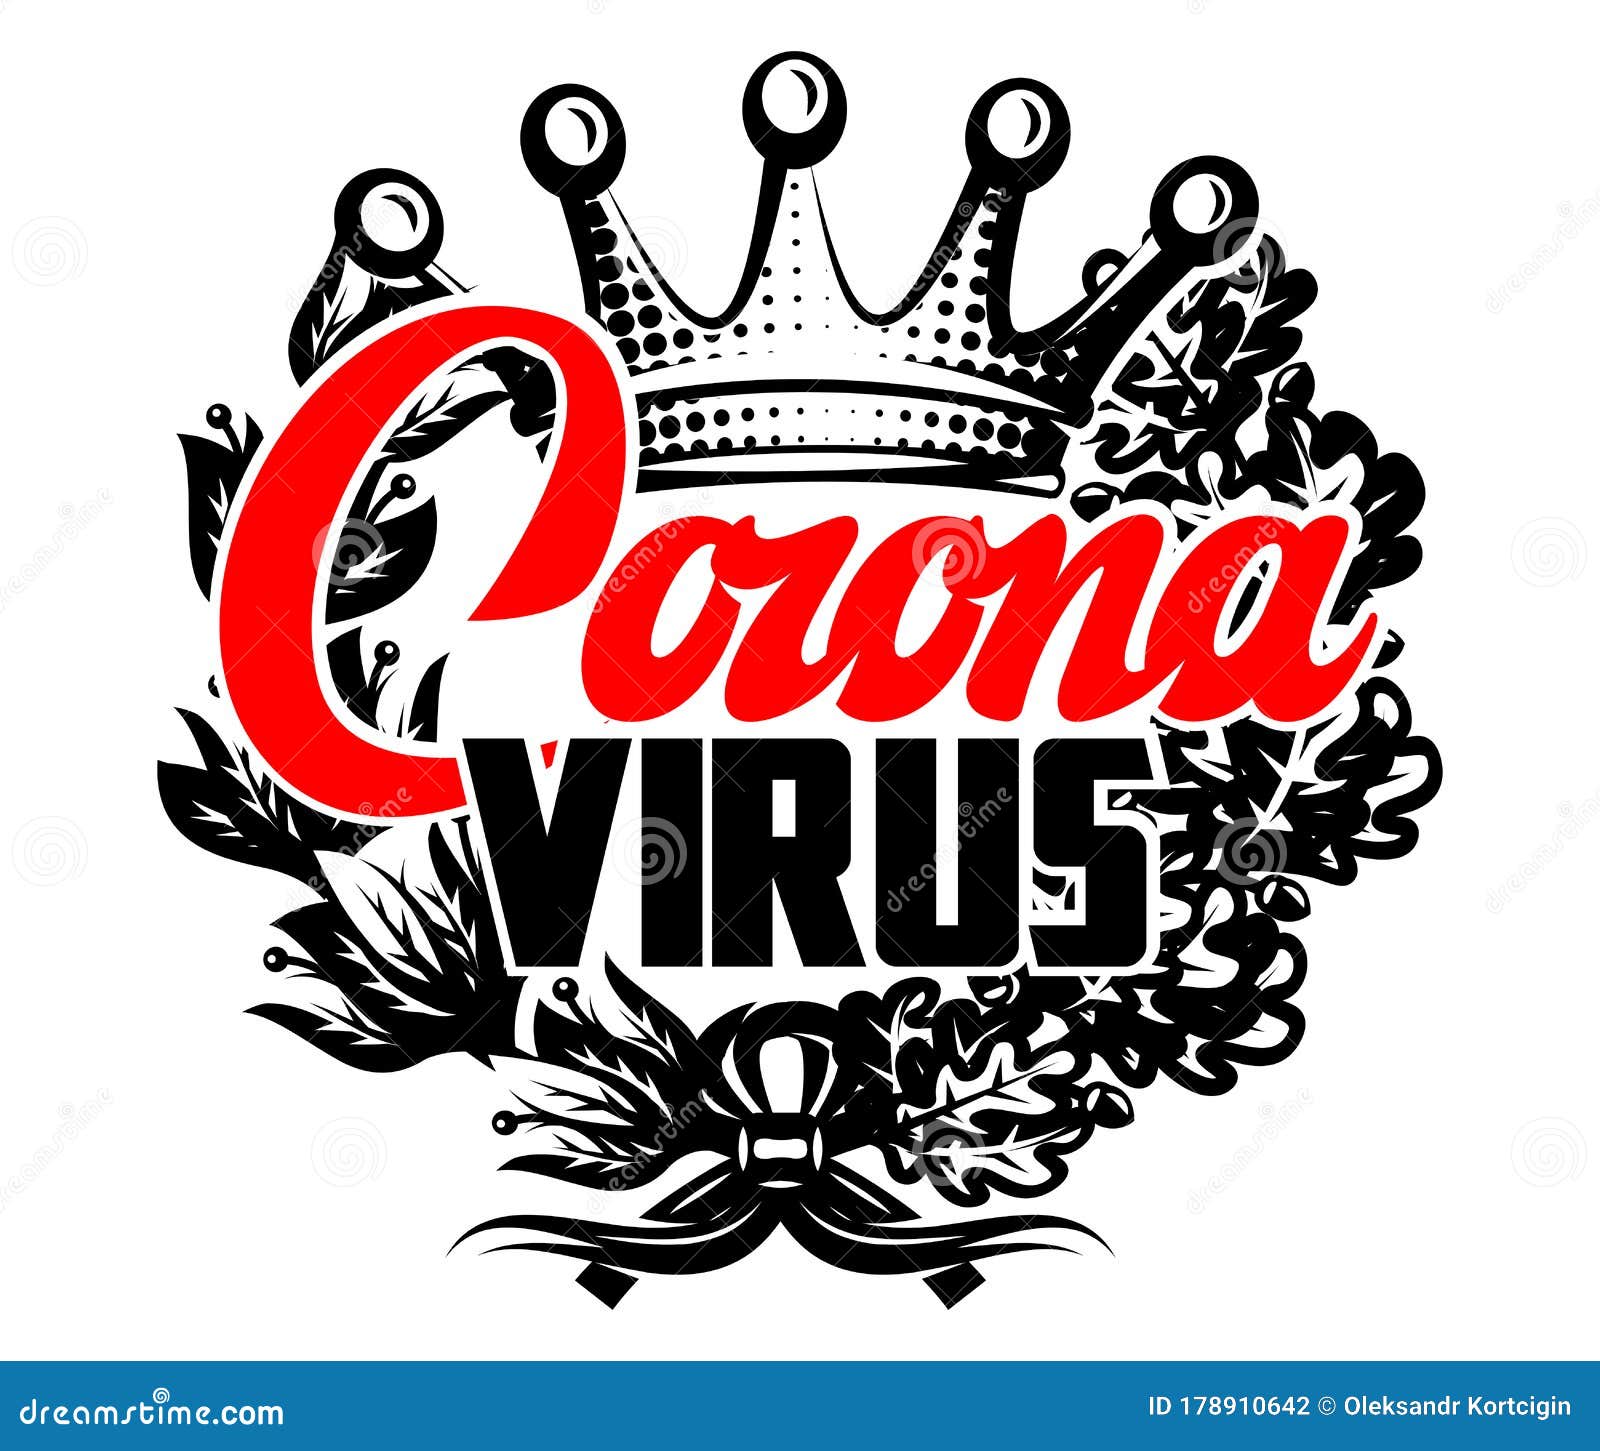   with crown, wreath and stylish lettering. coronovirus warning